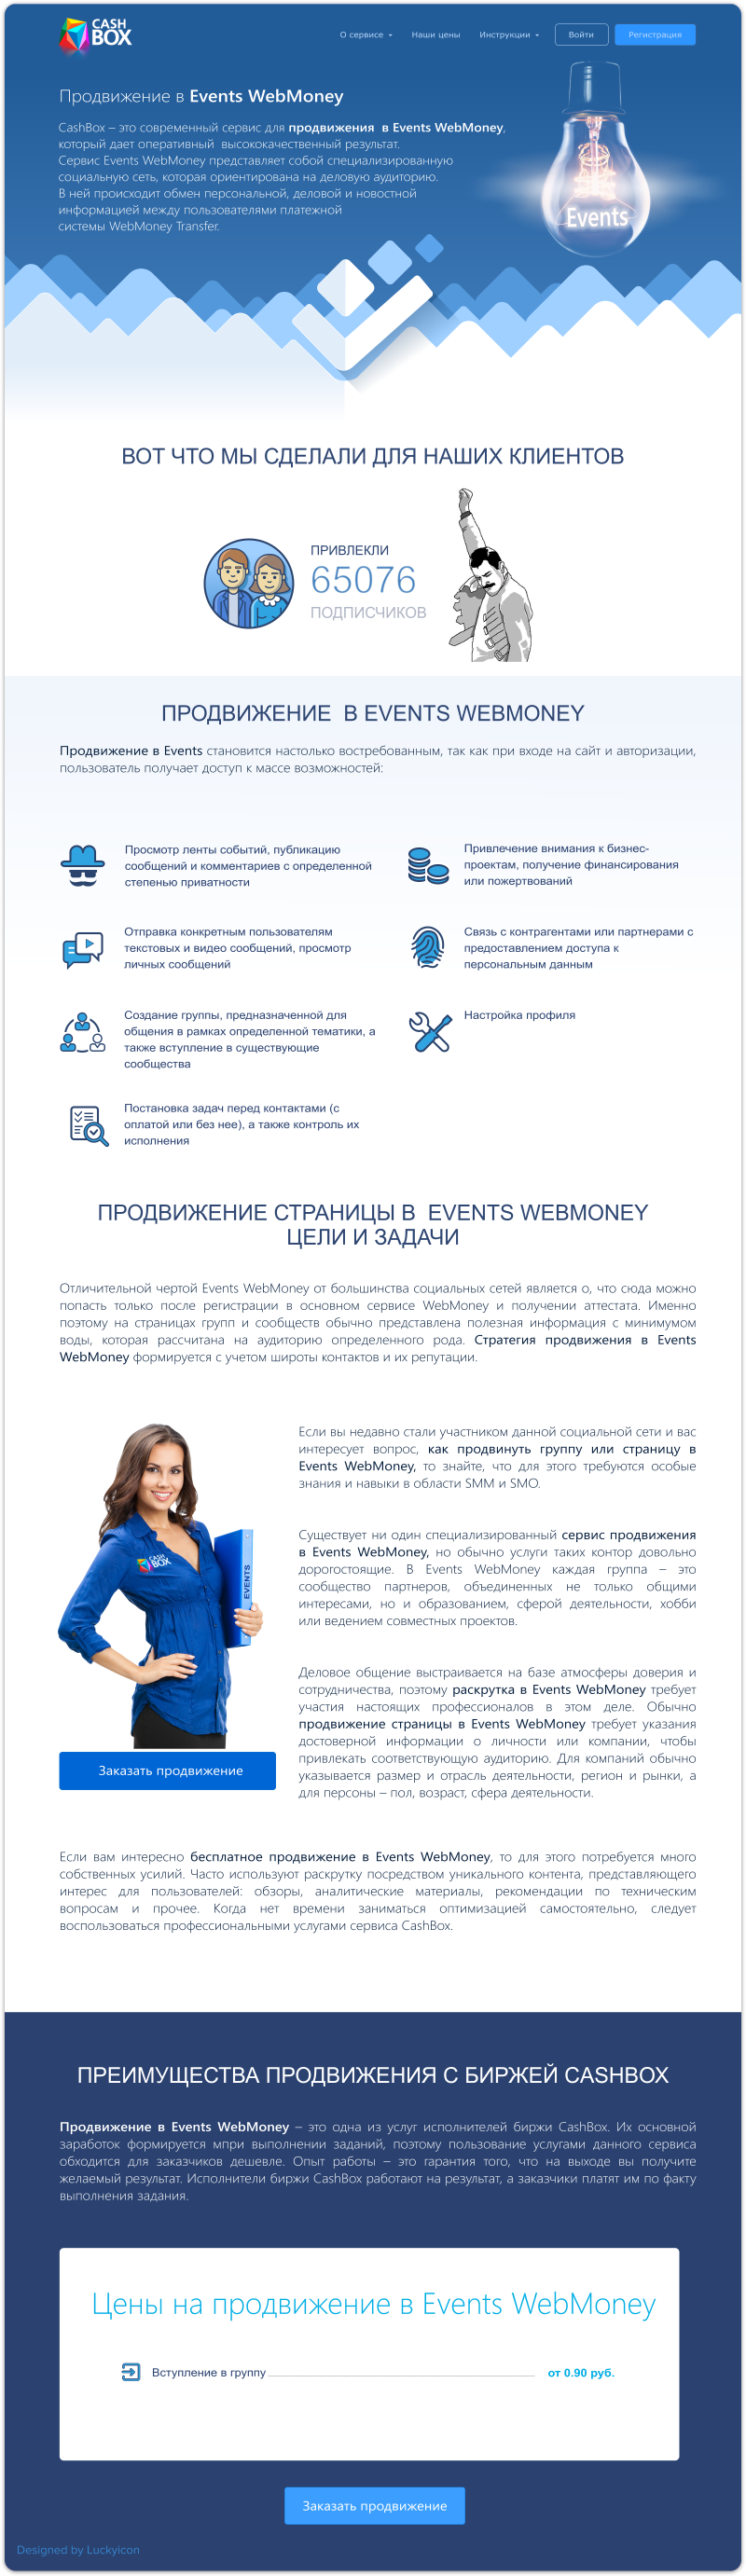 promotion page in Events Webmoney